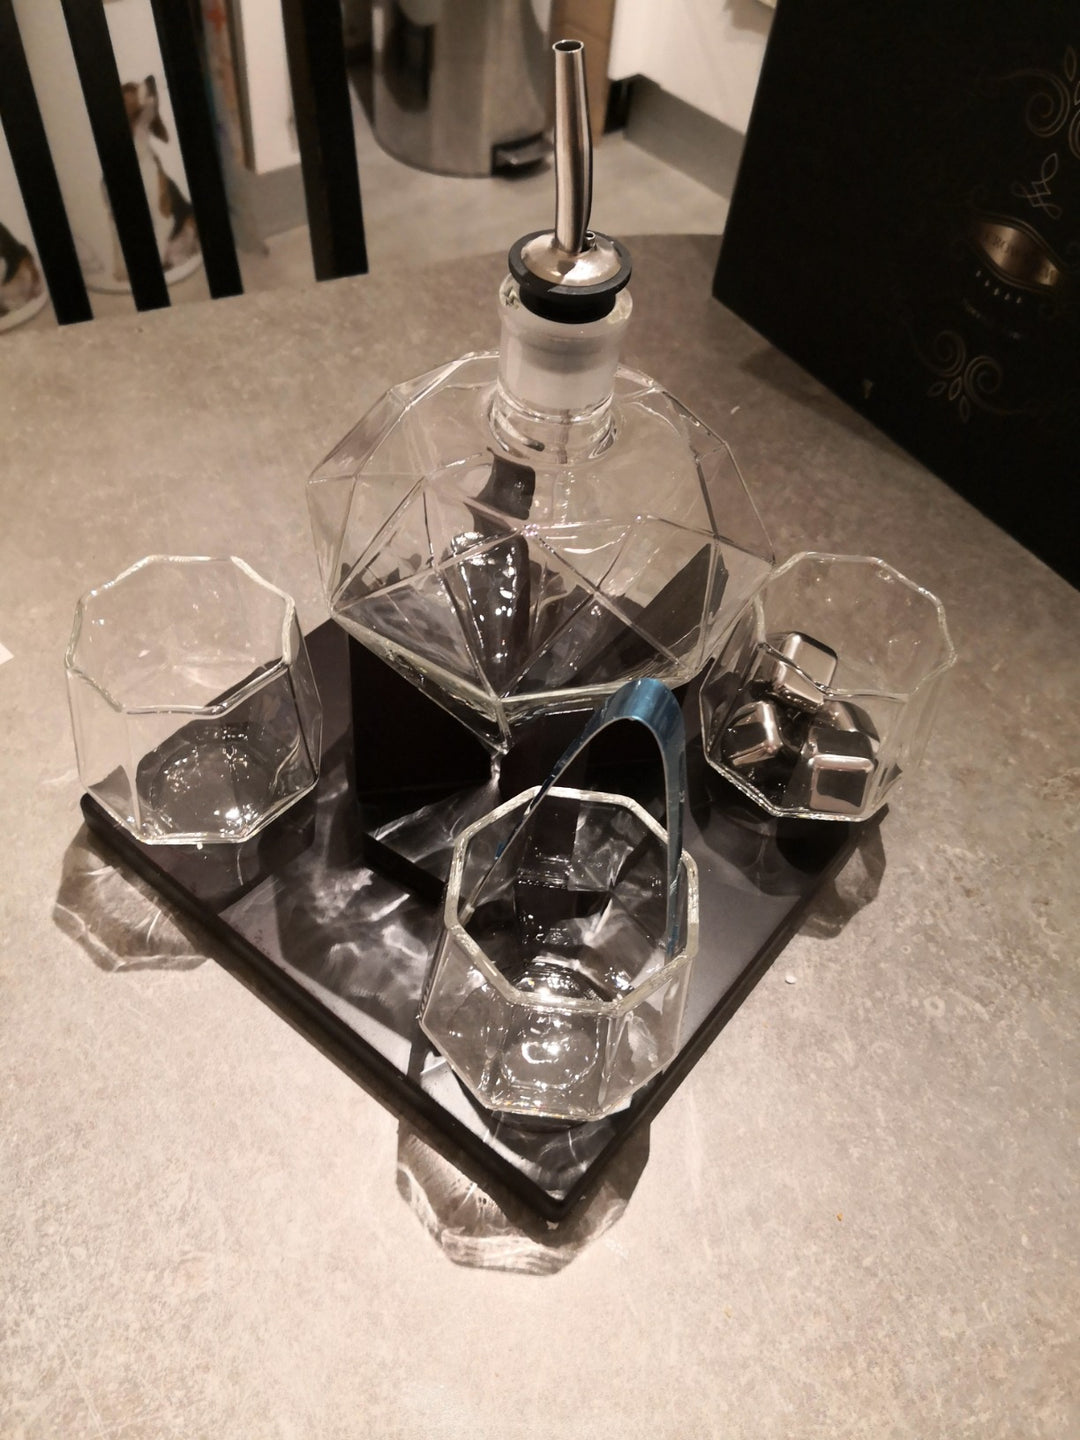 jewel_decanter_on_table_with_4_glasses